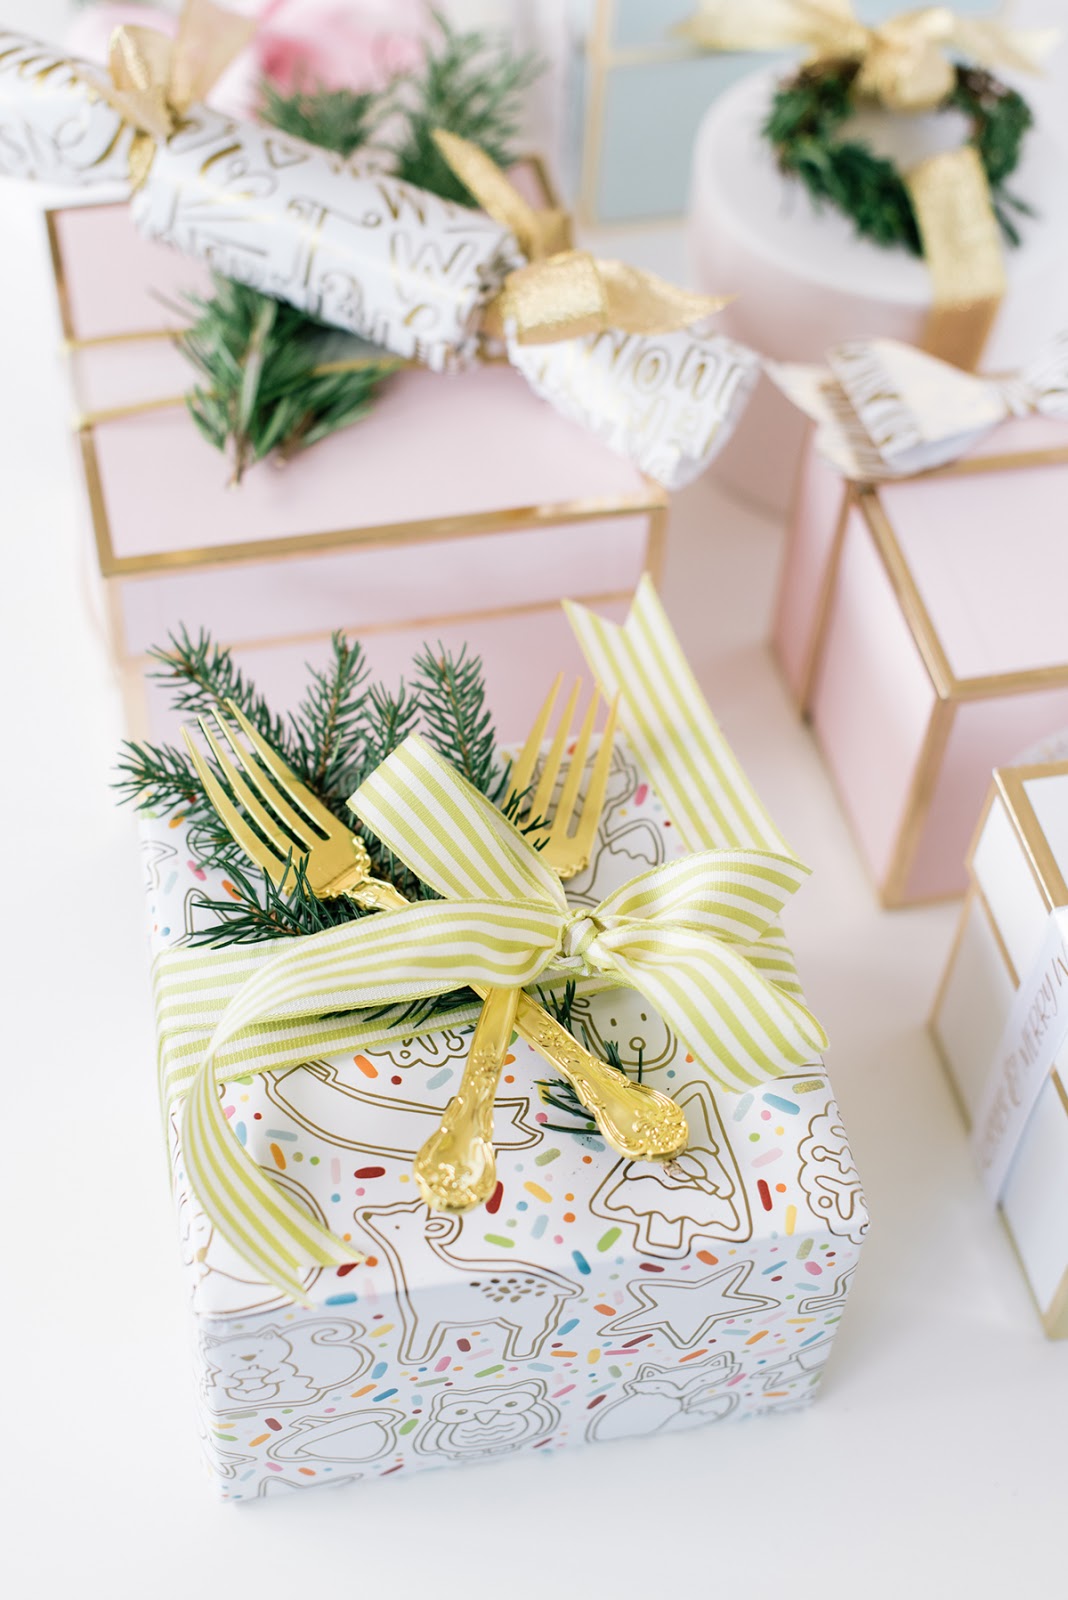 gift wrapping inspiration from Creative Bag